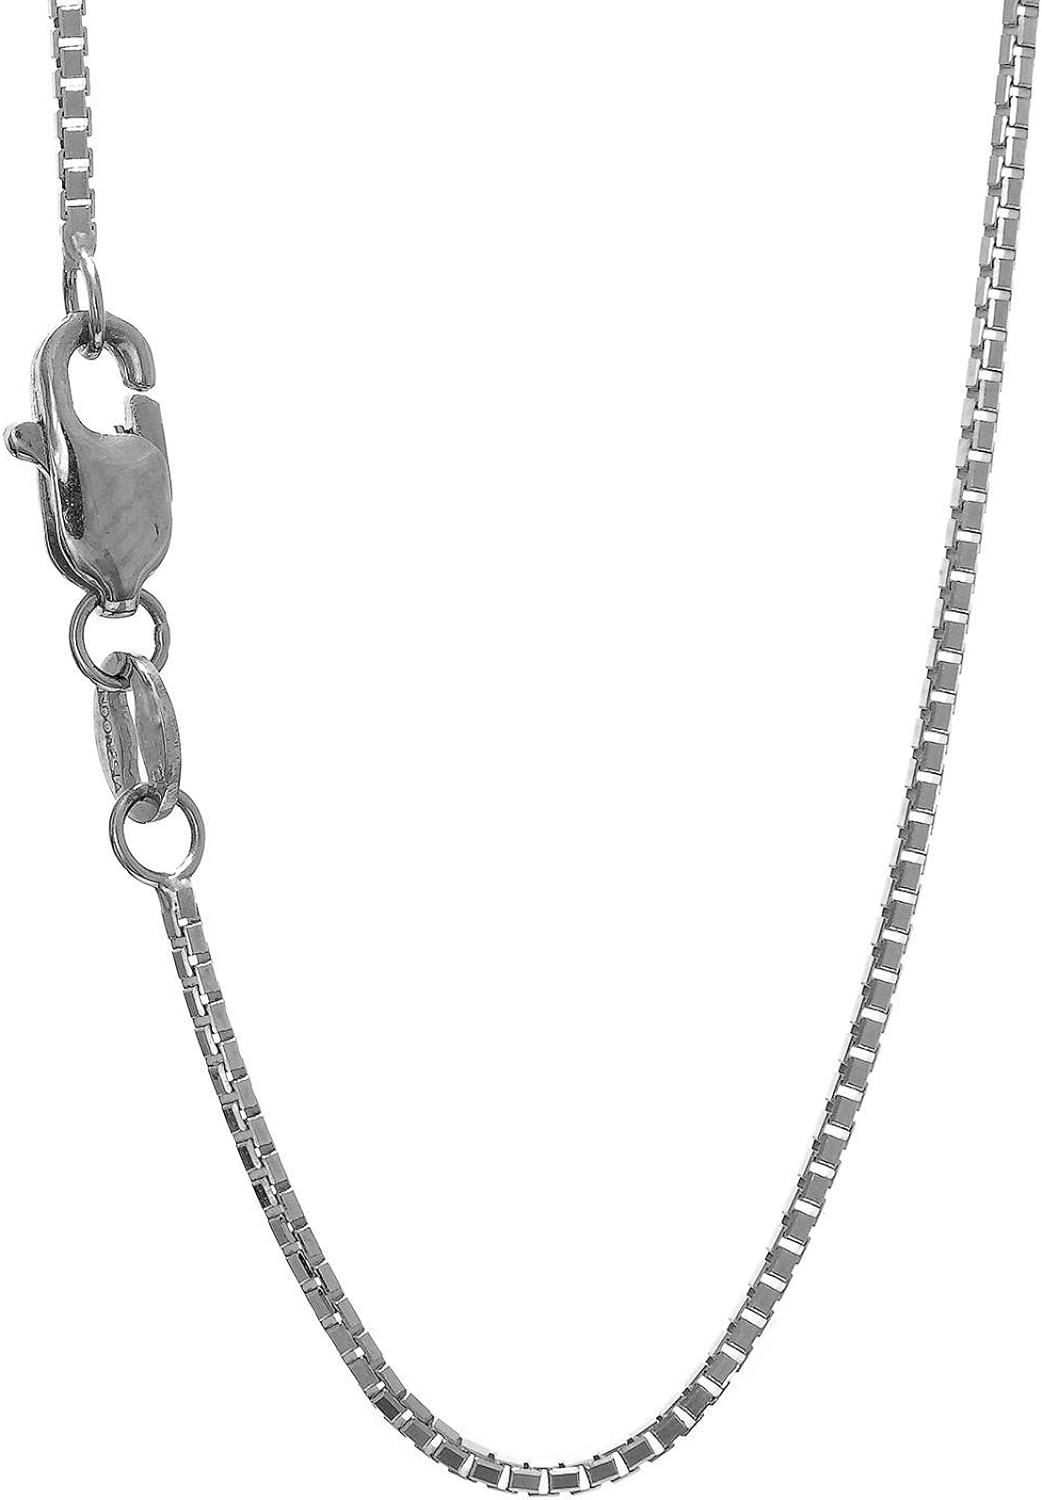 JewelStop 10k Solid White Gold 1.2 mm Octagonal Box Chain Necklace, Lobster Claw Clasp - 20 Inches, 4.8gr.